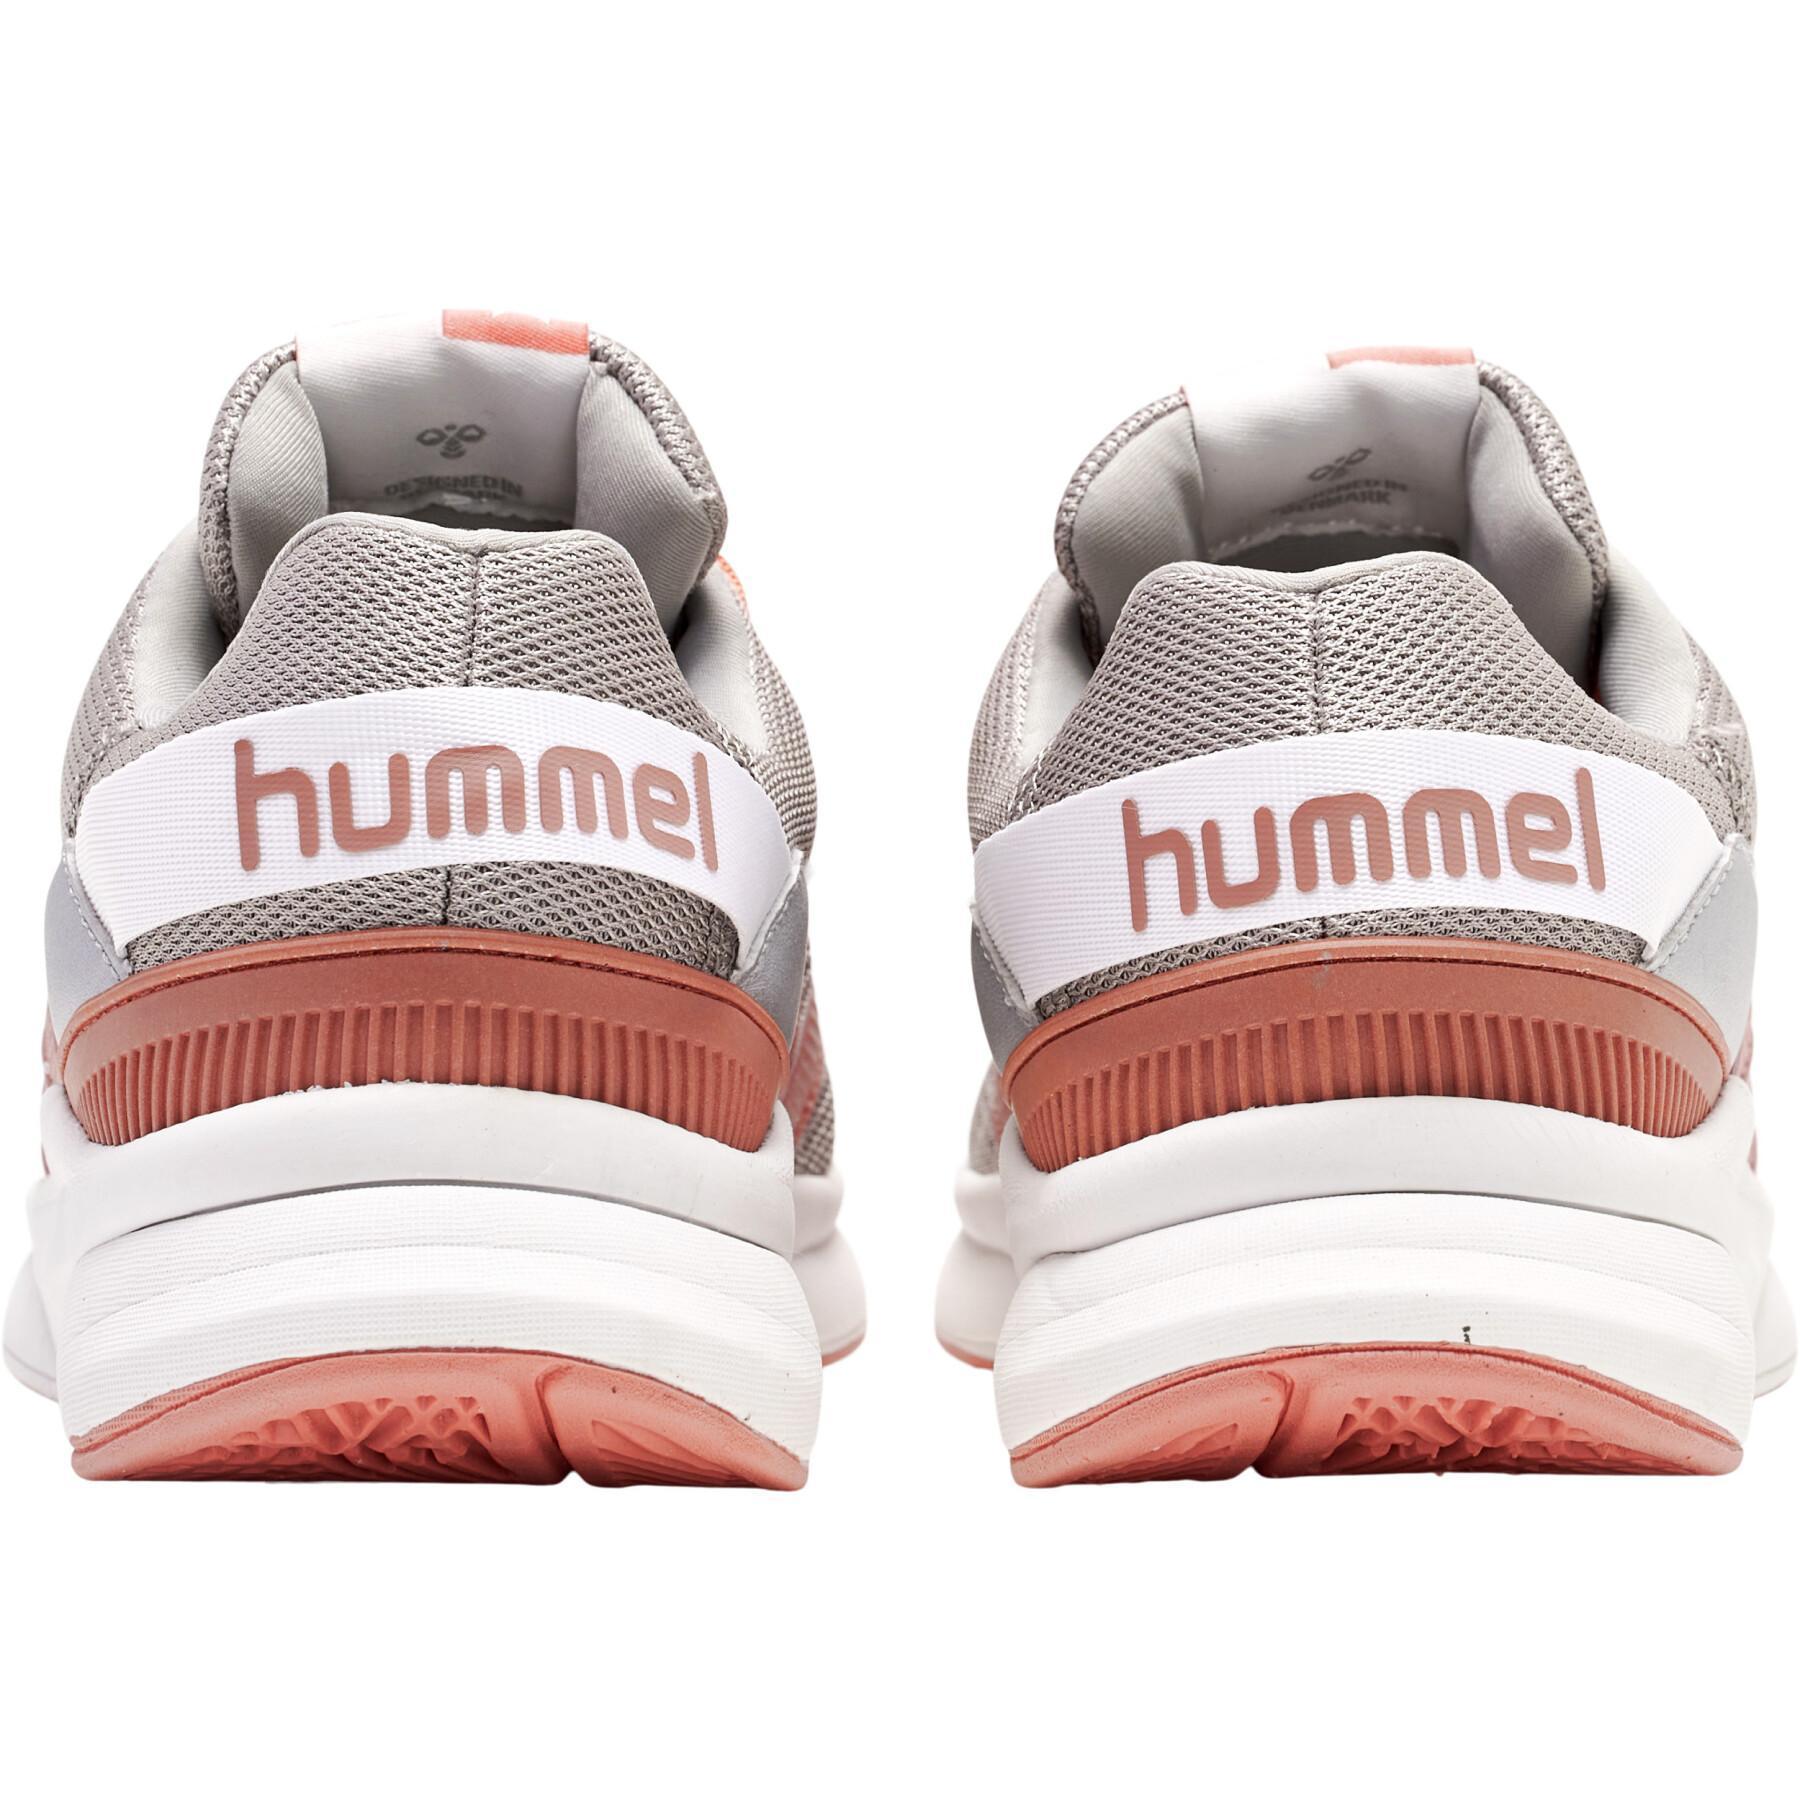 Children's sneakers Hummel Reach 300 Lace Recycled